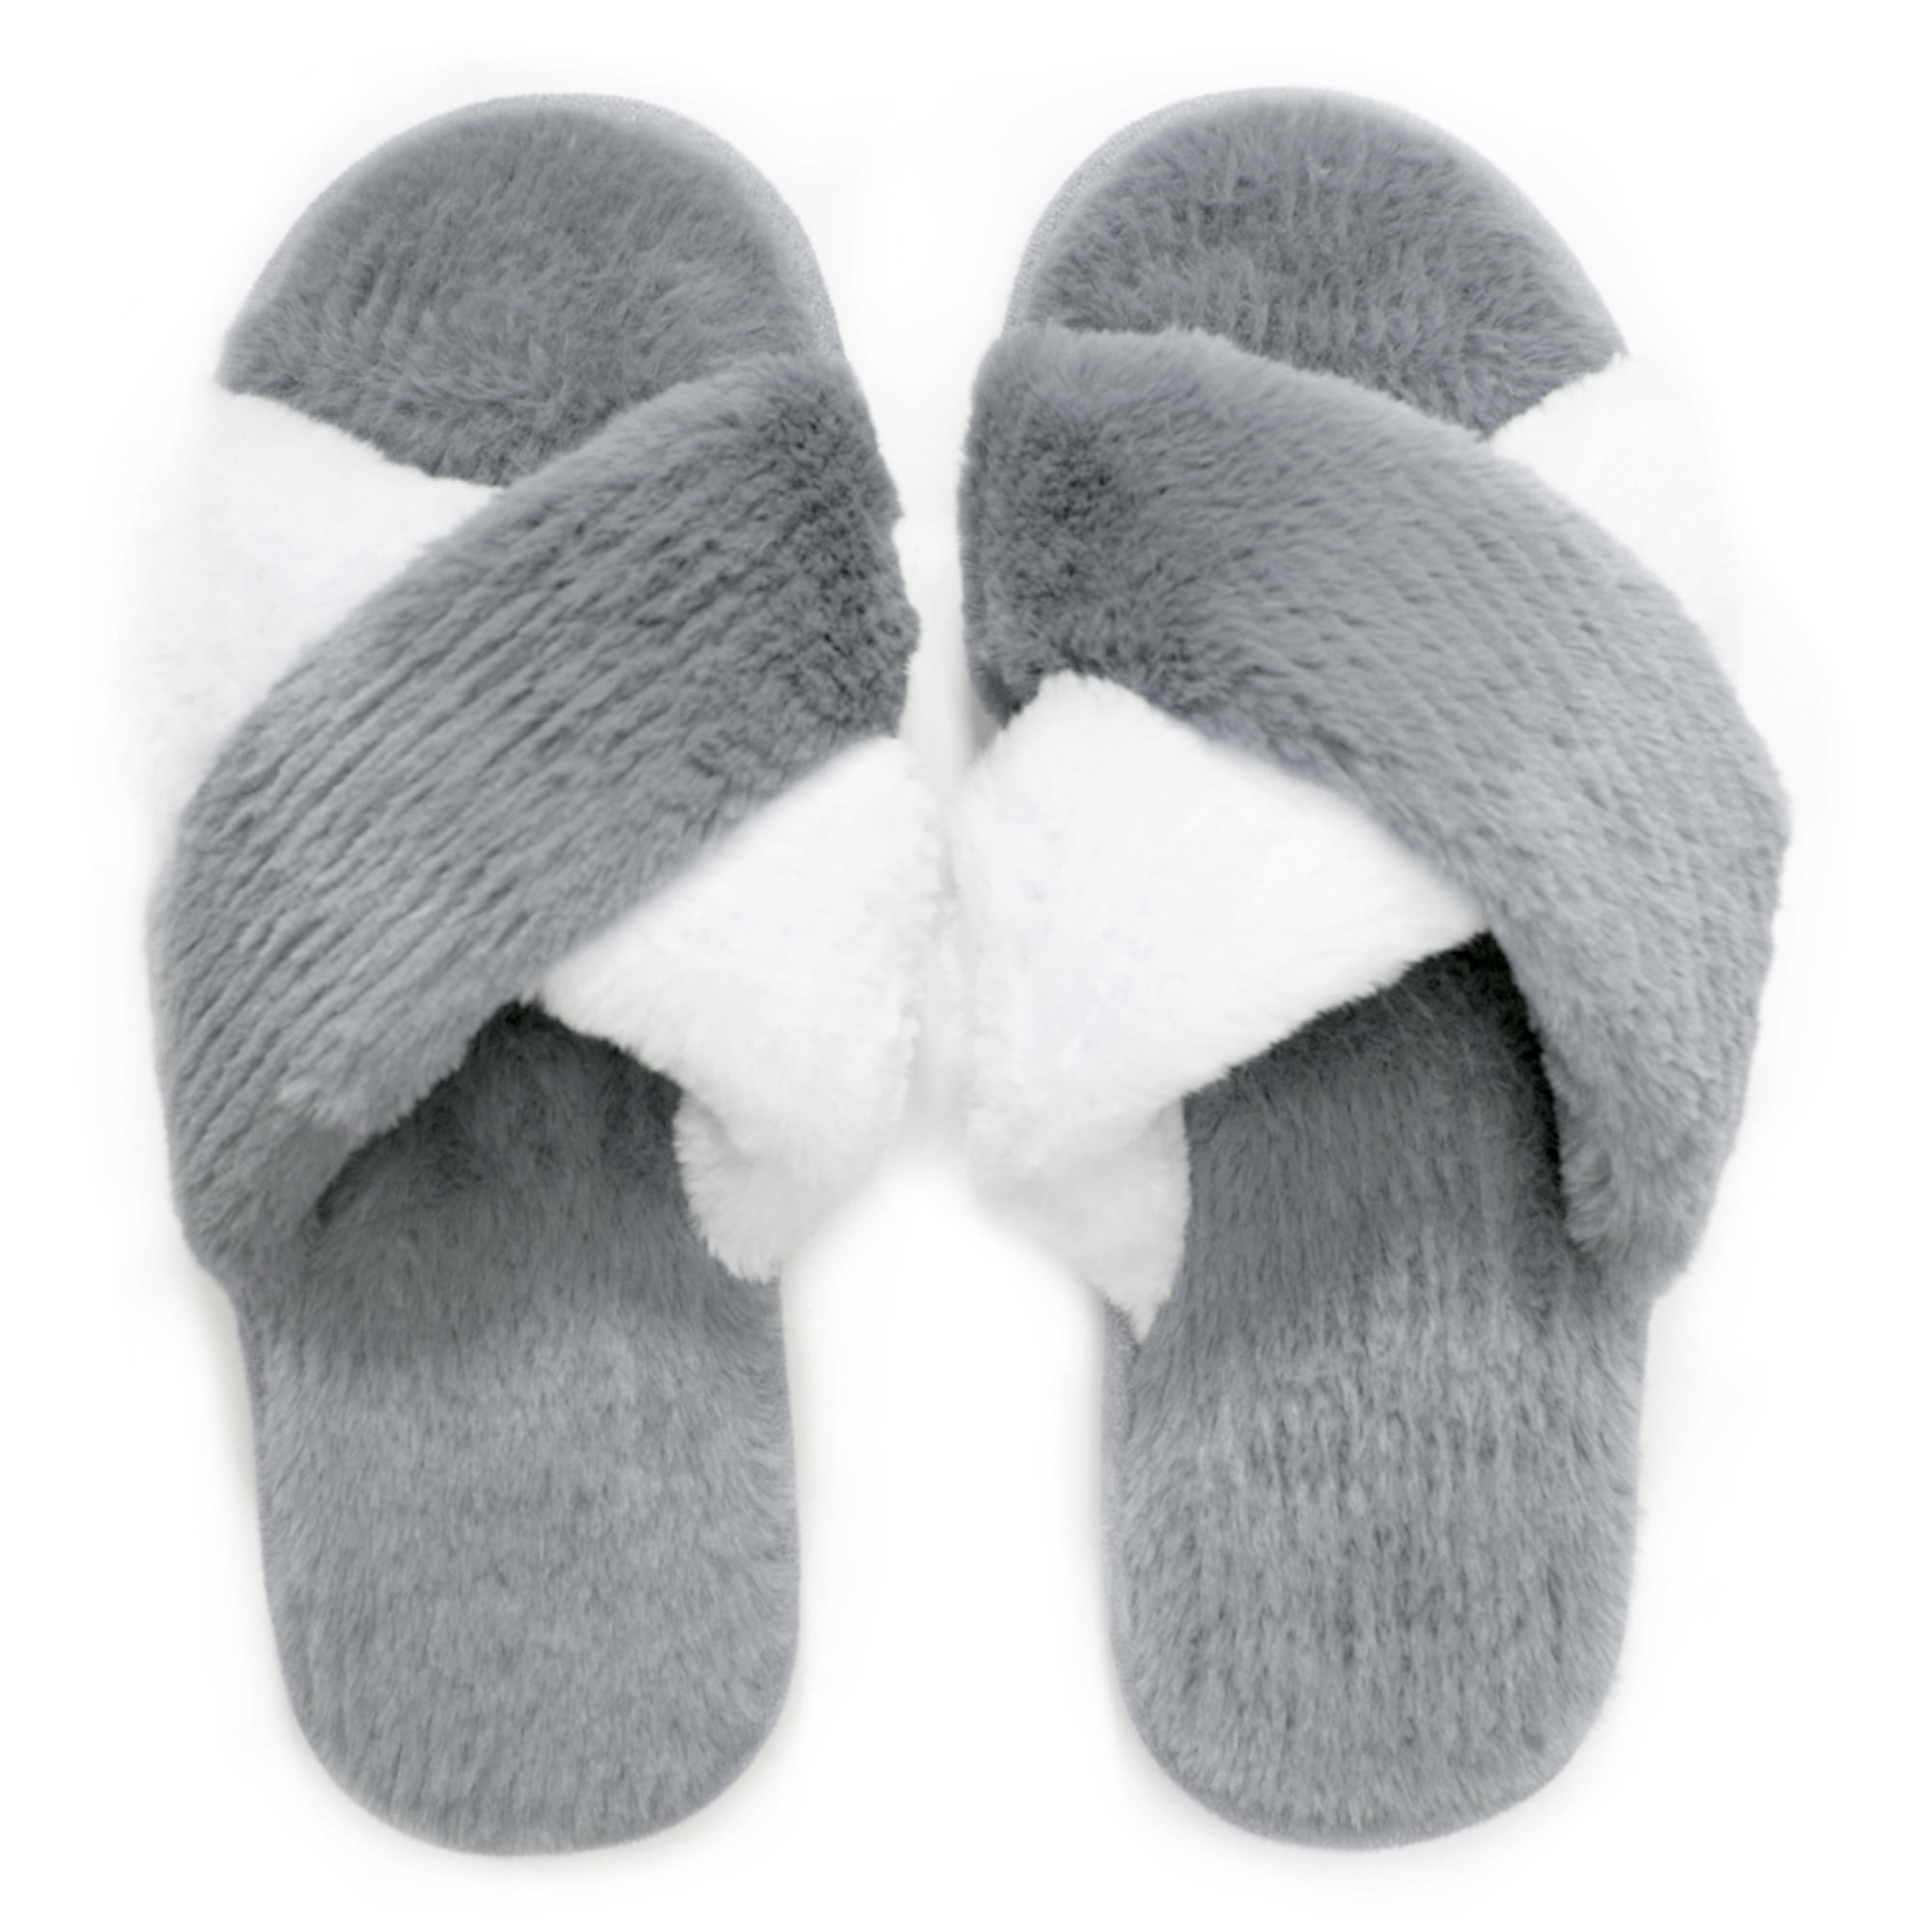 DL Womens Cross Band Soft Plush Slippers Furry Fleece Slip on Slippers Open Toe House Shoes Slides for Indoor Outdoor 